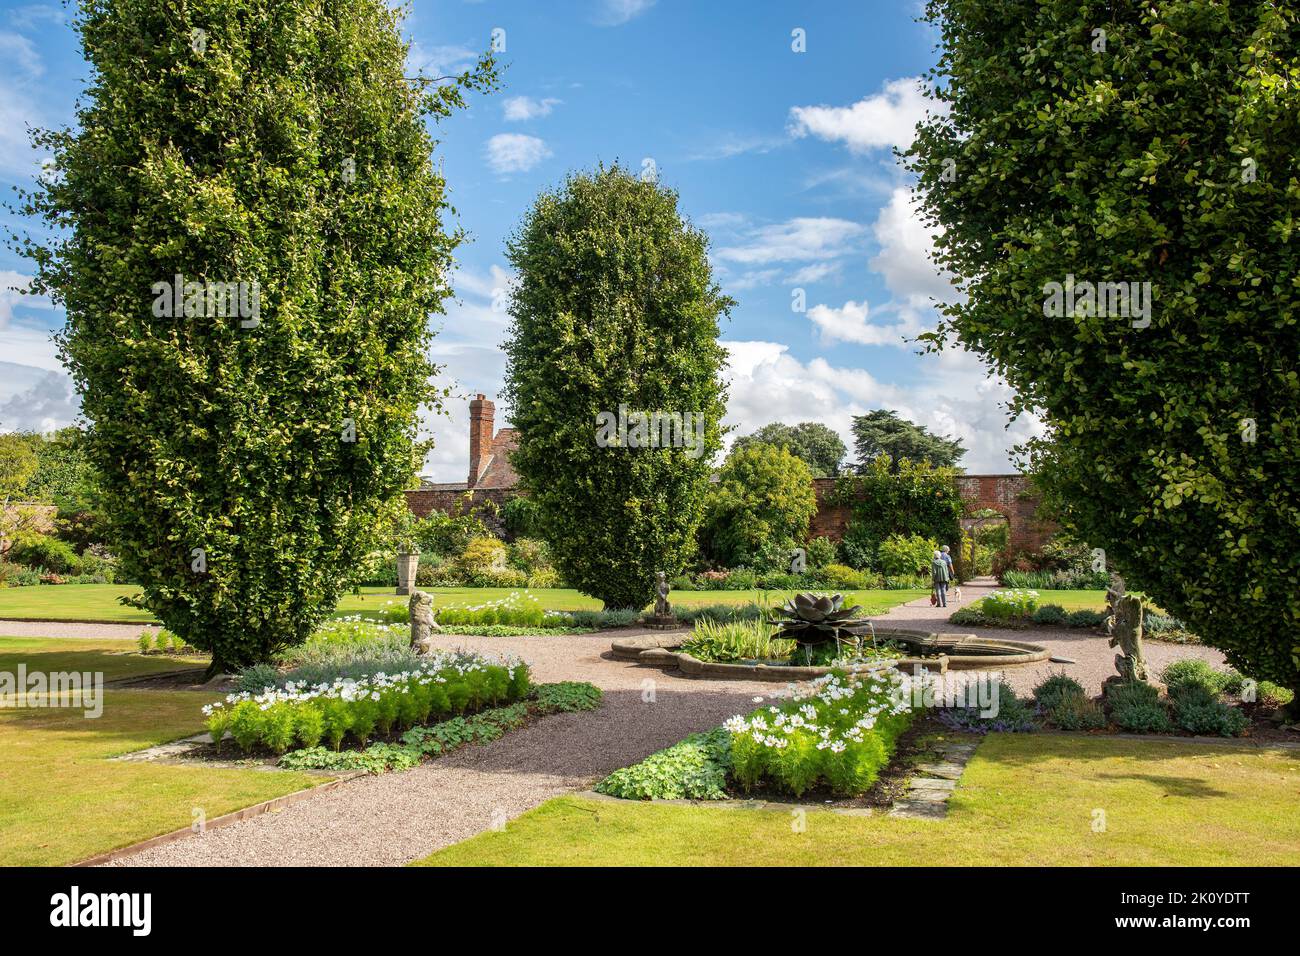 Arley Hall Cheshire England UK showing the floral displays in the walled gardens Stock Photo